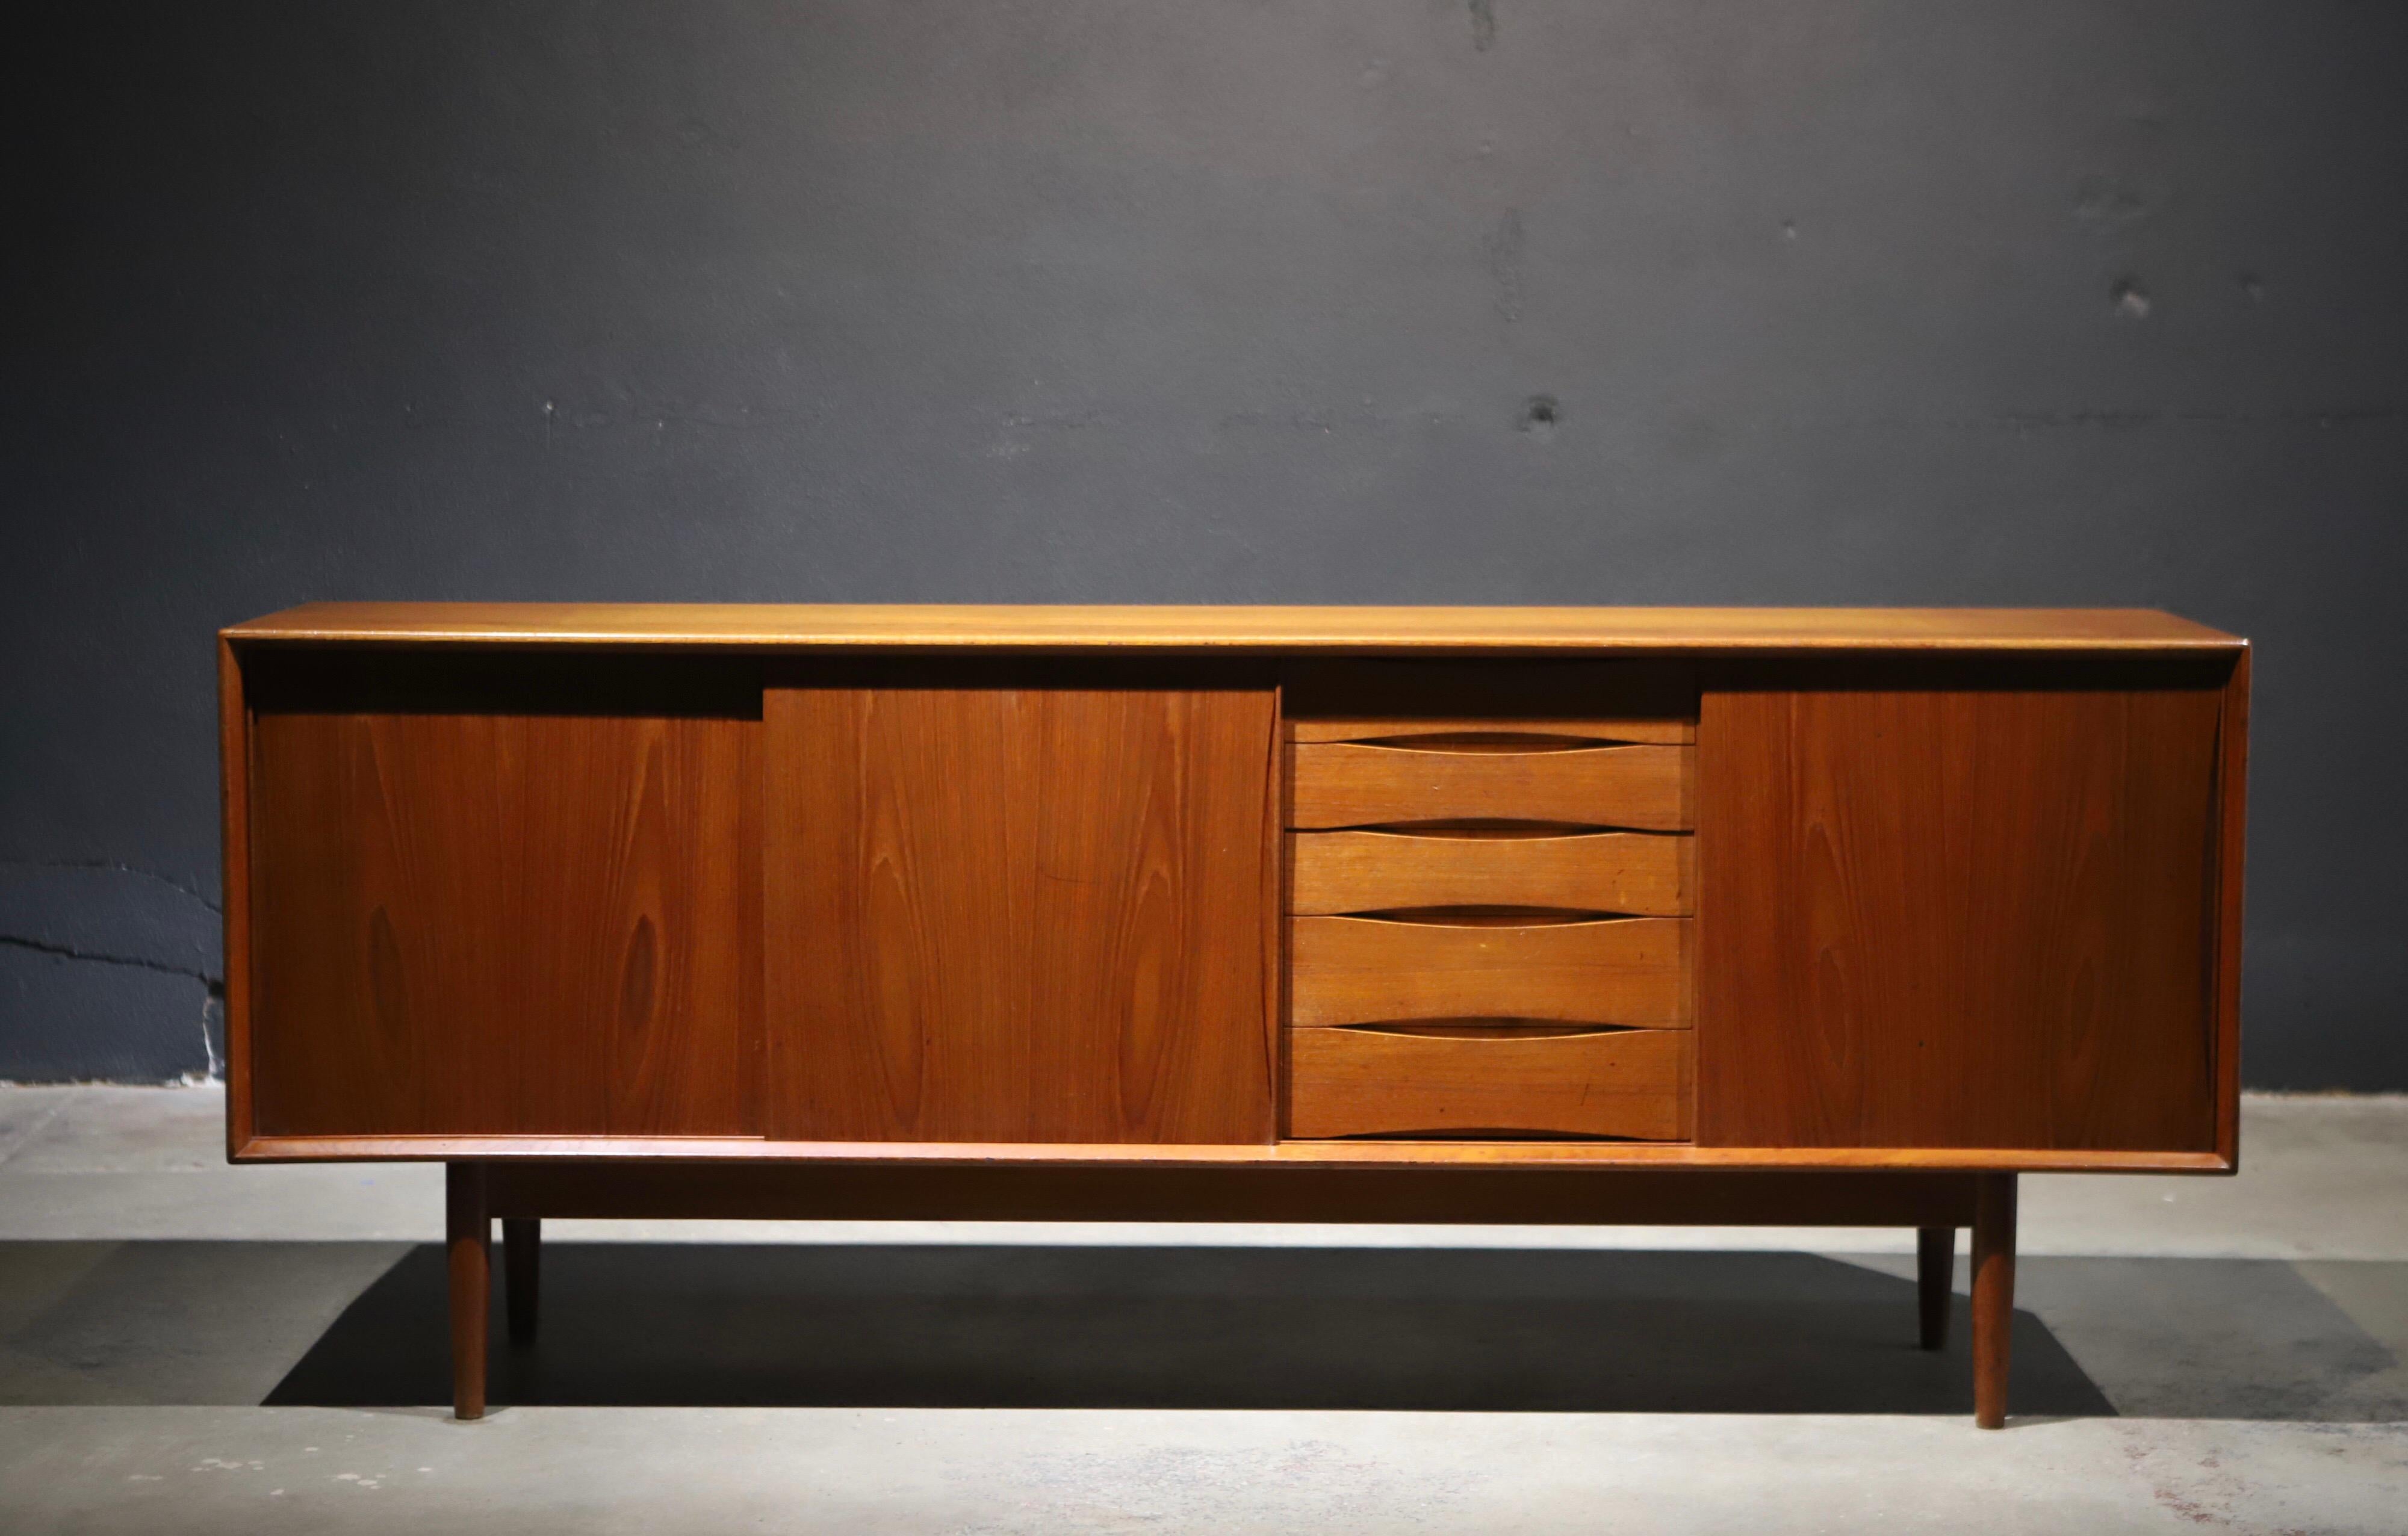 Beautiful teak credenza or sideboard with three sliding doors, one large storage area, one smaller and five drawers. A stunning piece with similar lines to well known Danish architect Finn Juhl. Stamped made in Sweden. Photographed with Eames wire